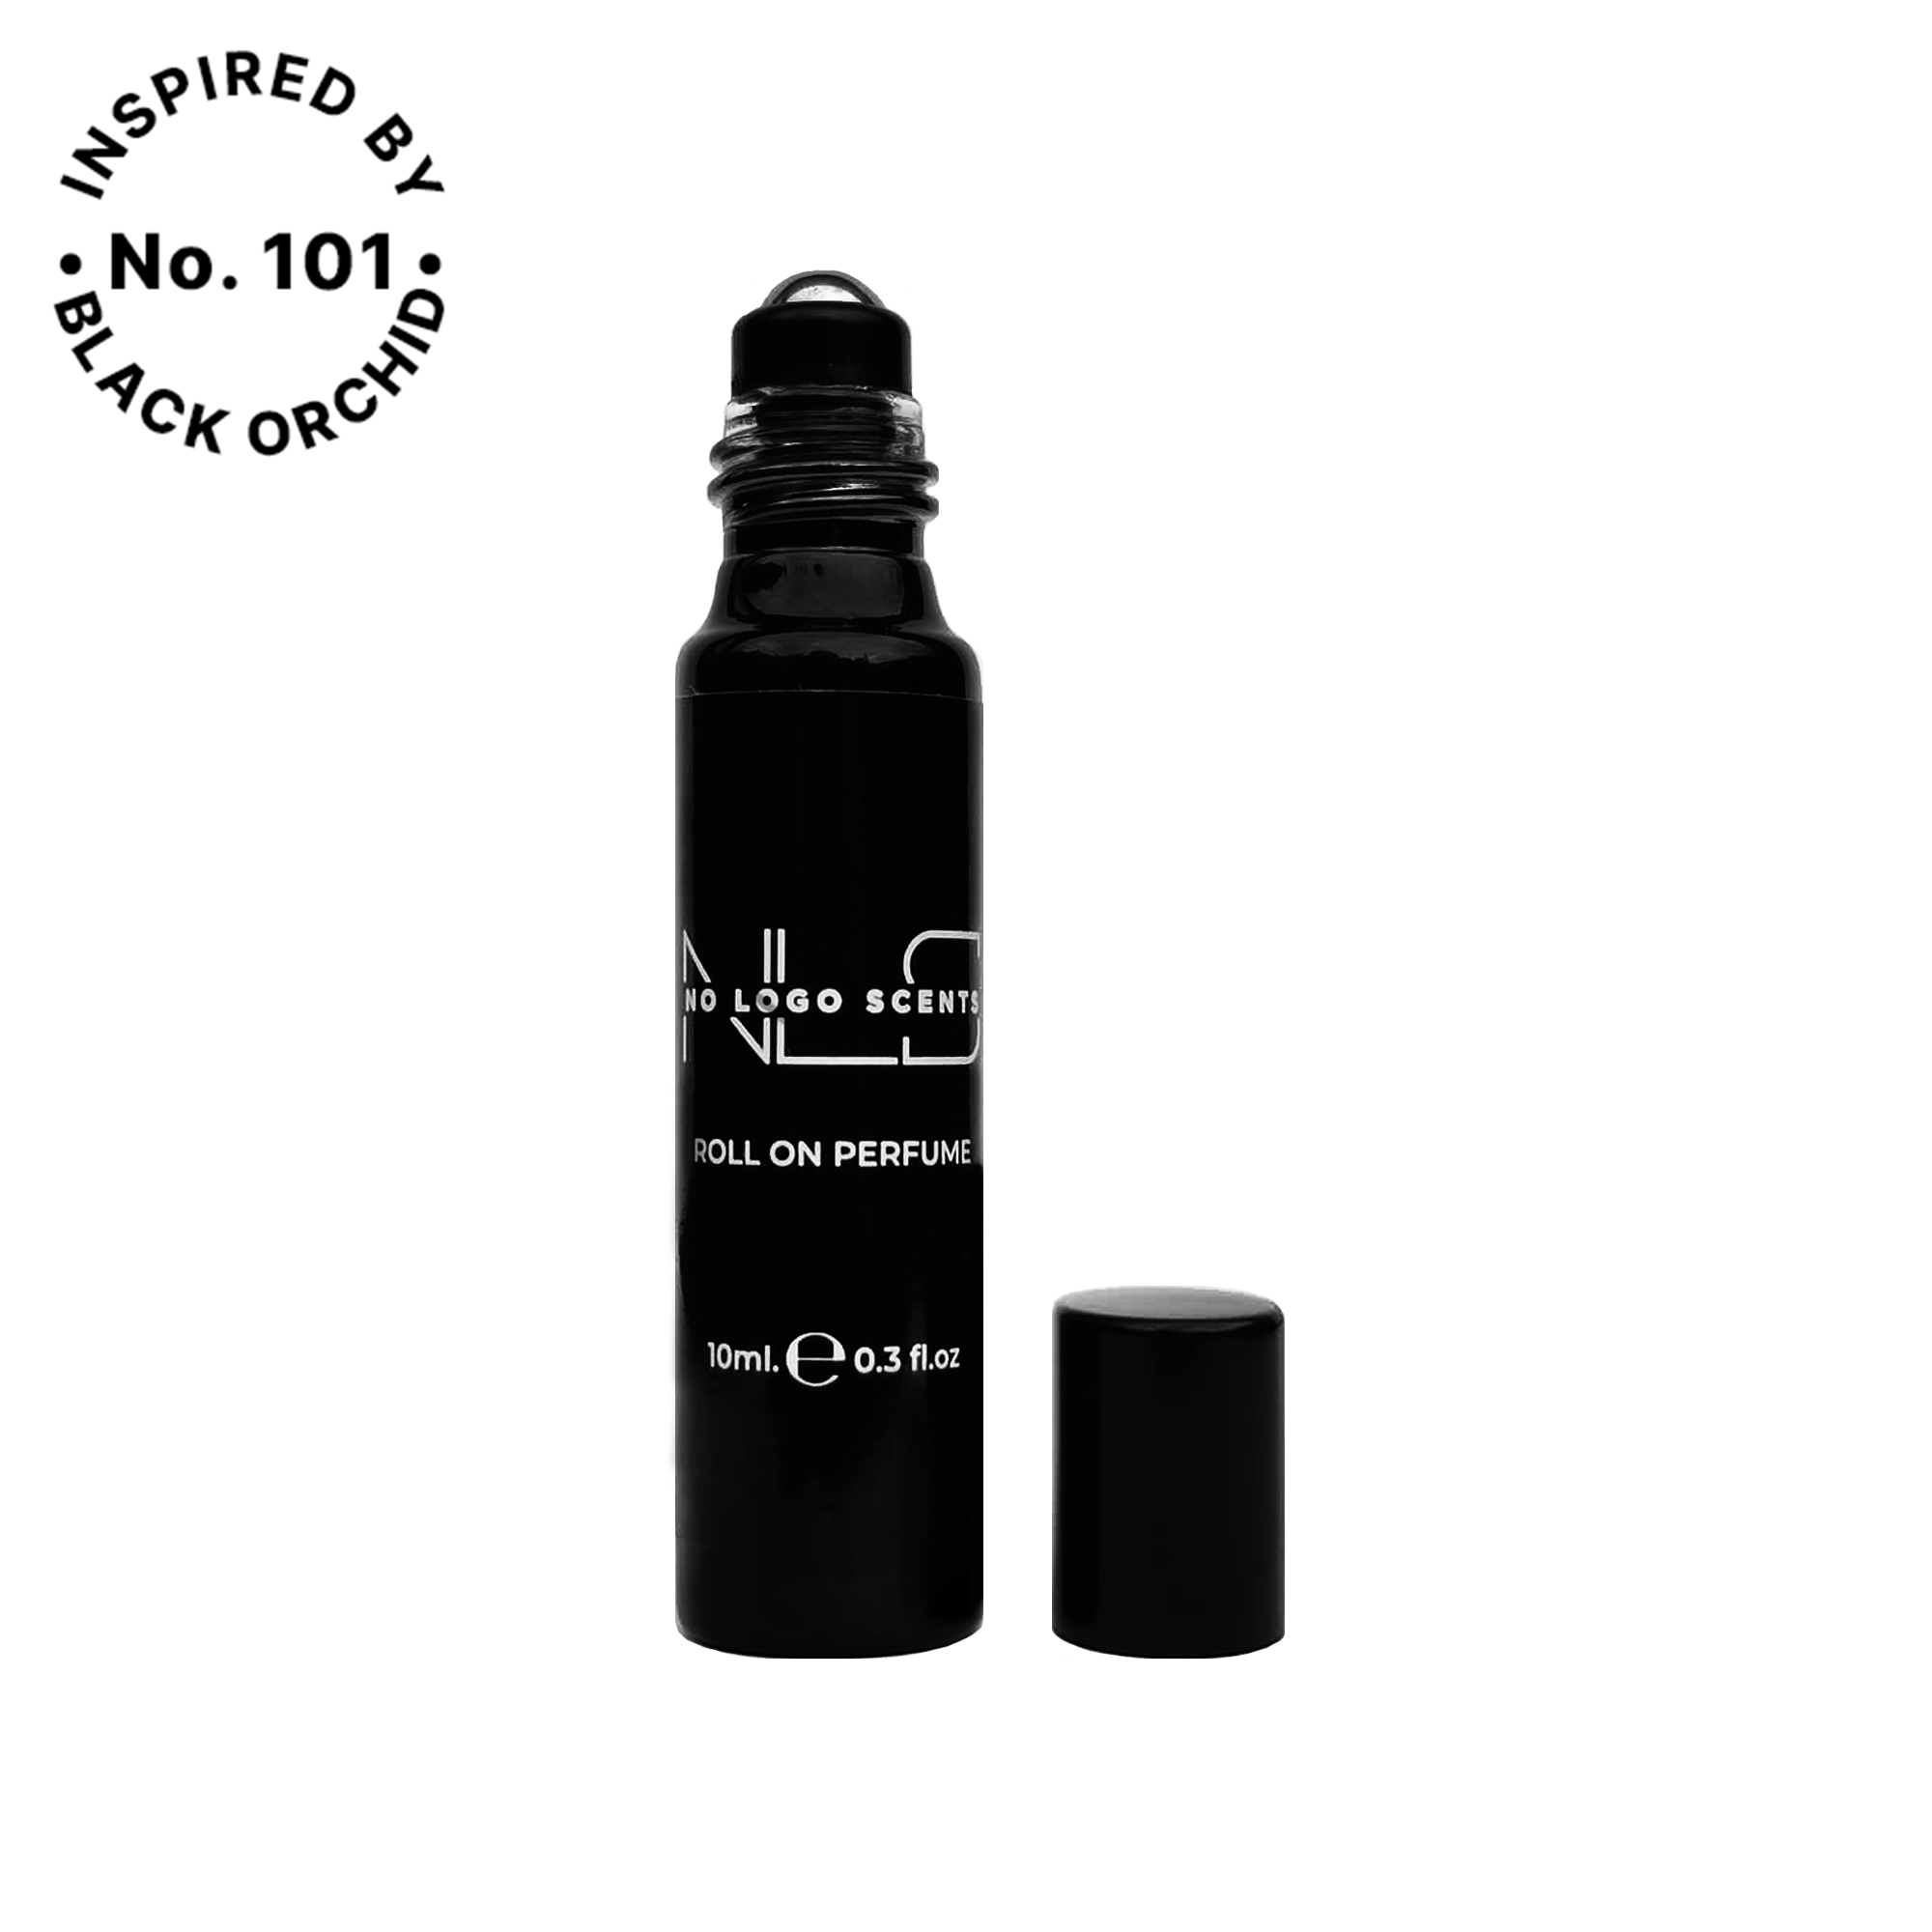 No.101 INSPIRED BY BLACK ORCHID from category UNISEX ROLL ON PERFUMES - 1